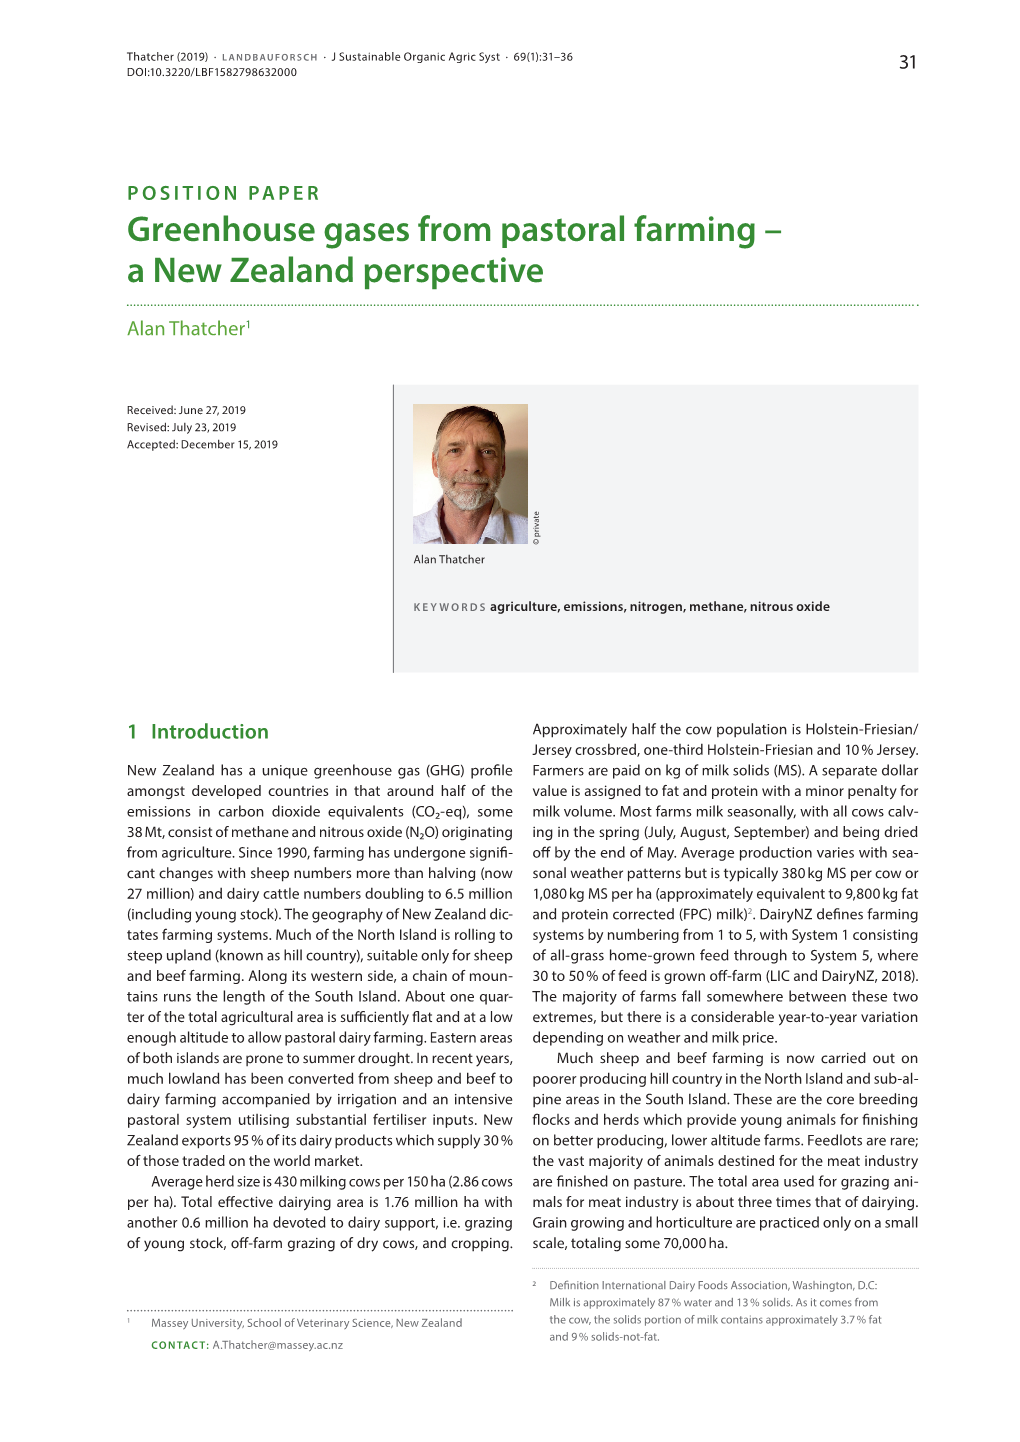 Thatcher (2019) Greenhouse Gases from Pastoral Farming – a New Zealand Perspective